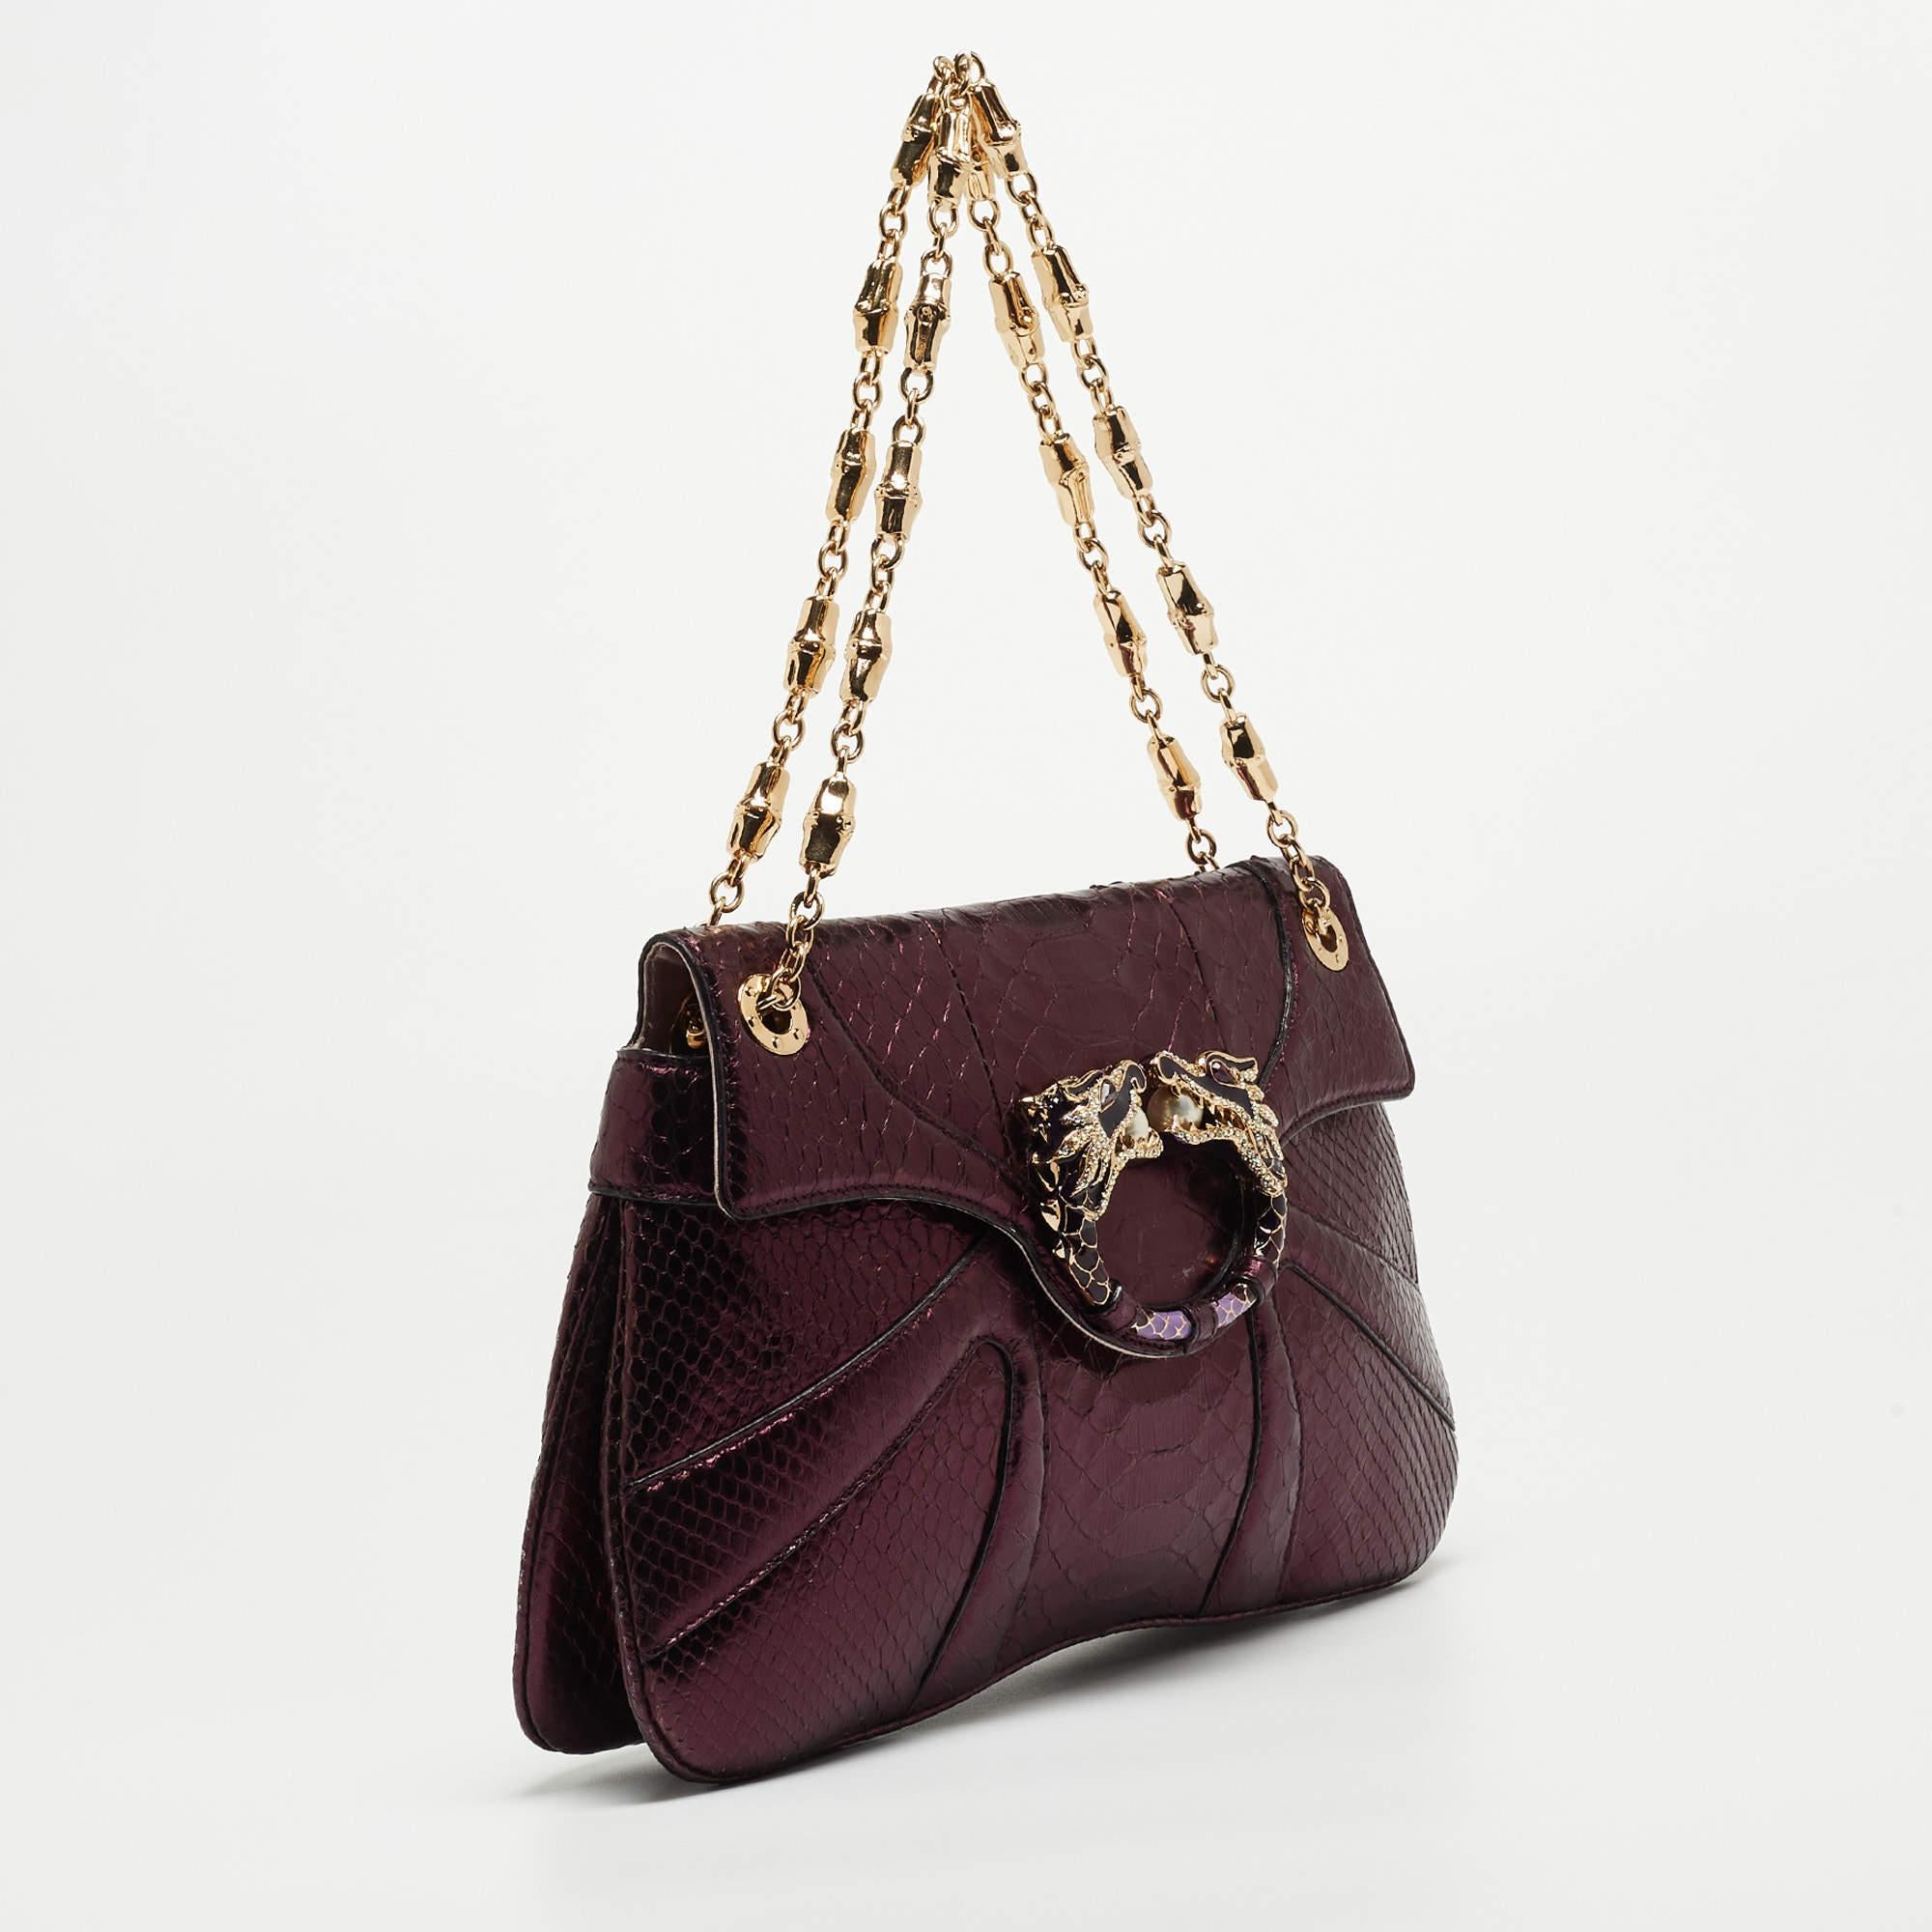 This Gucci shoulder bag beautifully shows quality craftsmanship. The interior of this gorgeous bag is lined with fabric, secured by an embellished flap, and held by a chain link.

